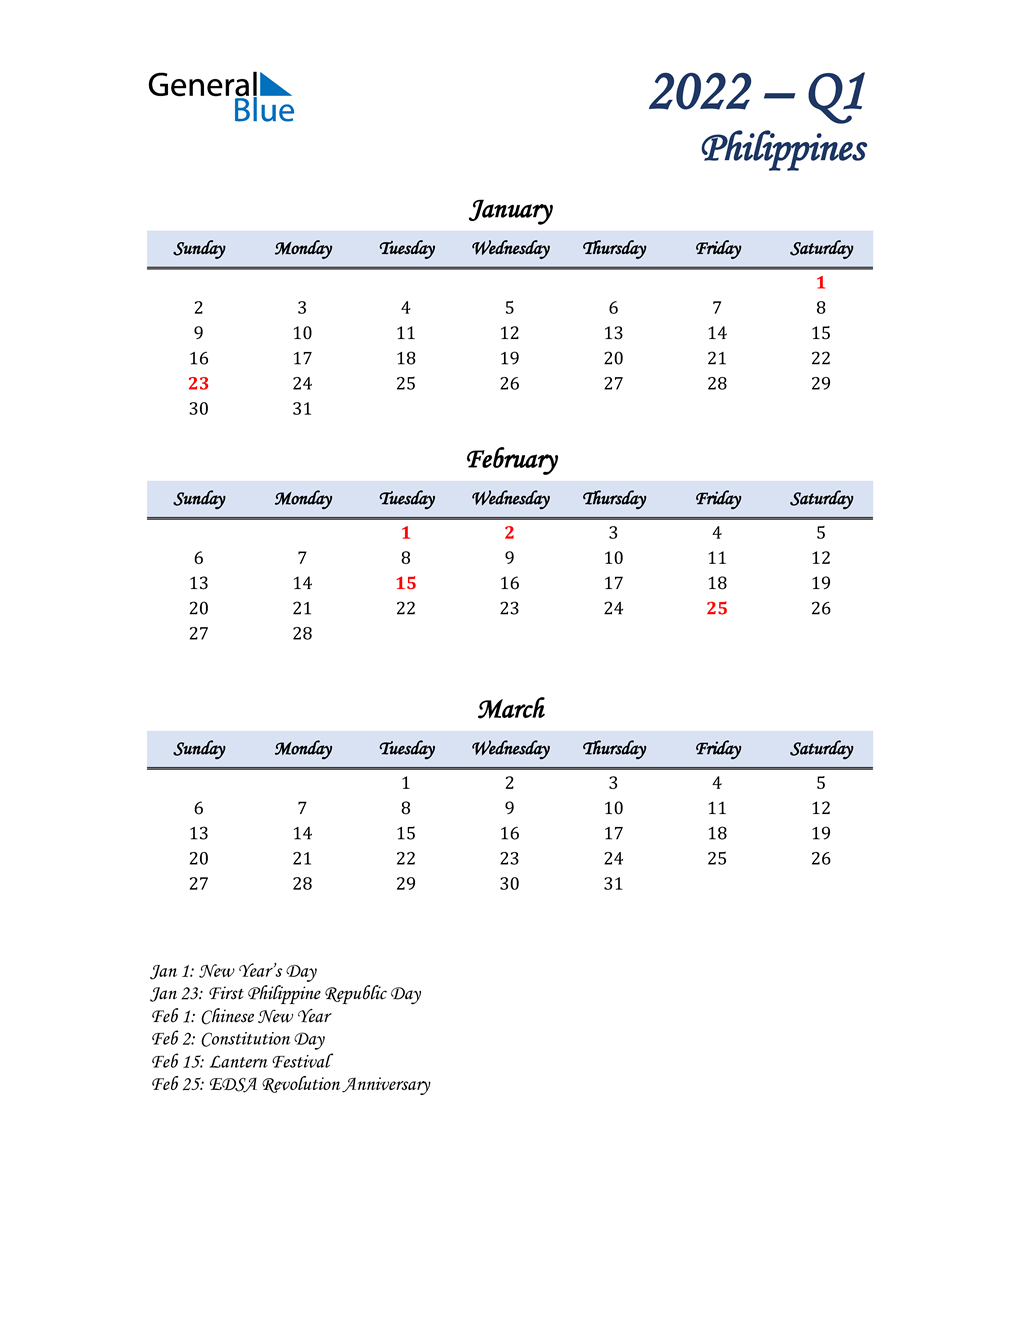  January, February, and March Calendar for Philippines